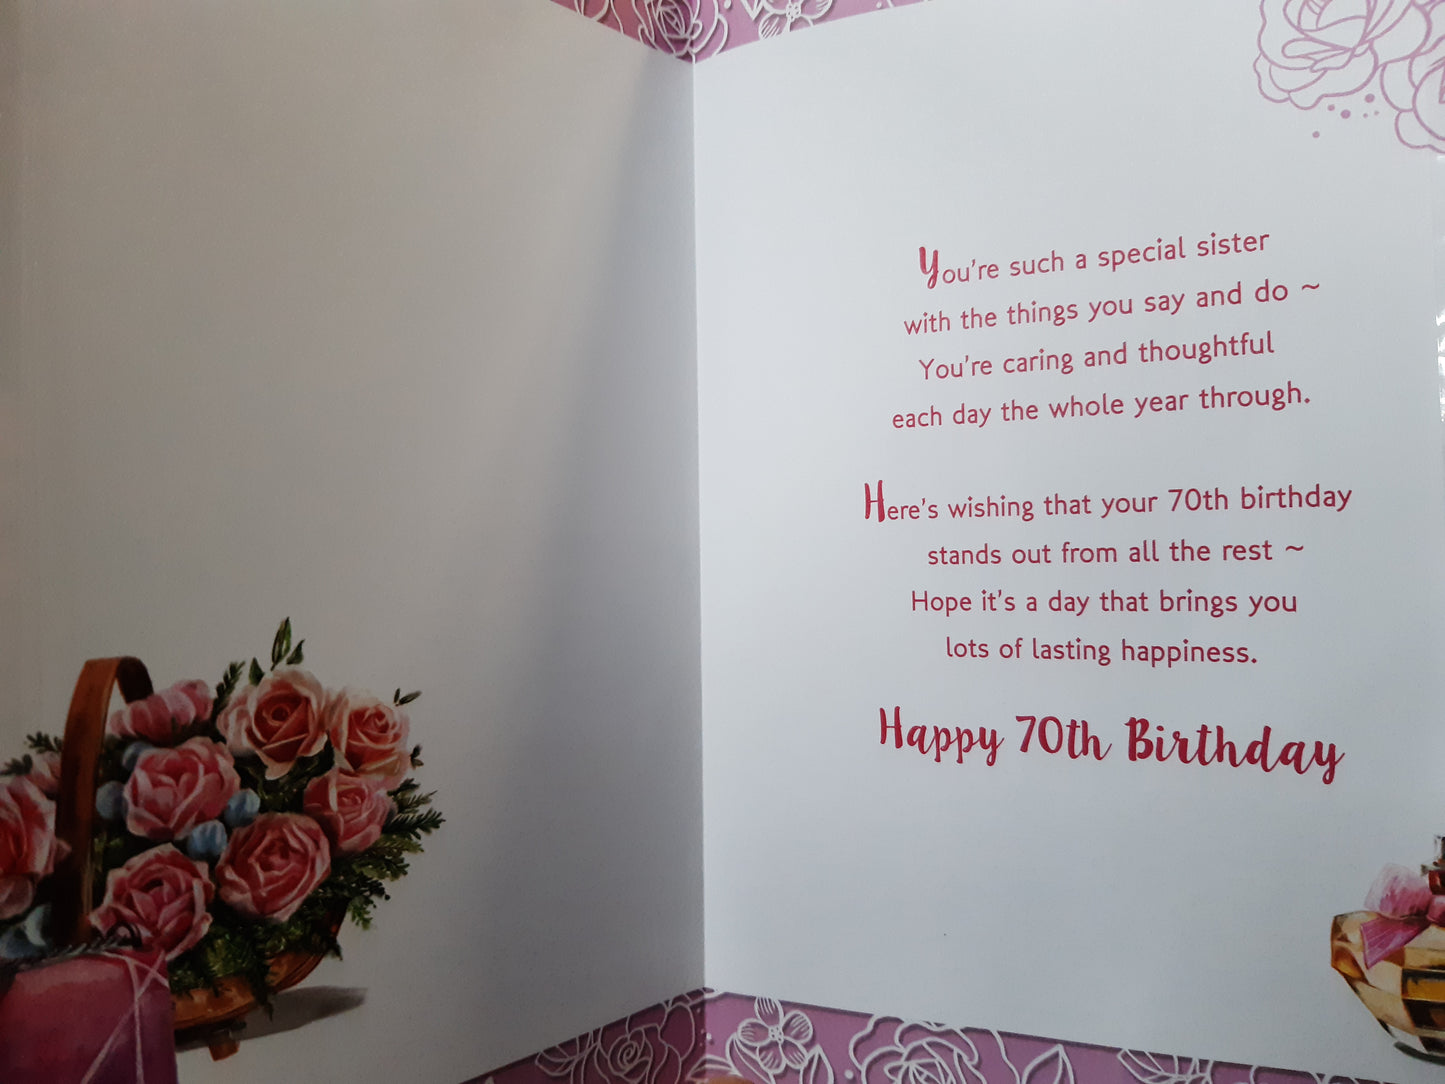 To a Special Sister On Your 70th Birthday Celebrity Style Greeting Card